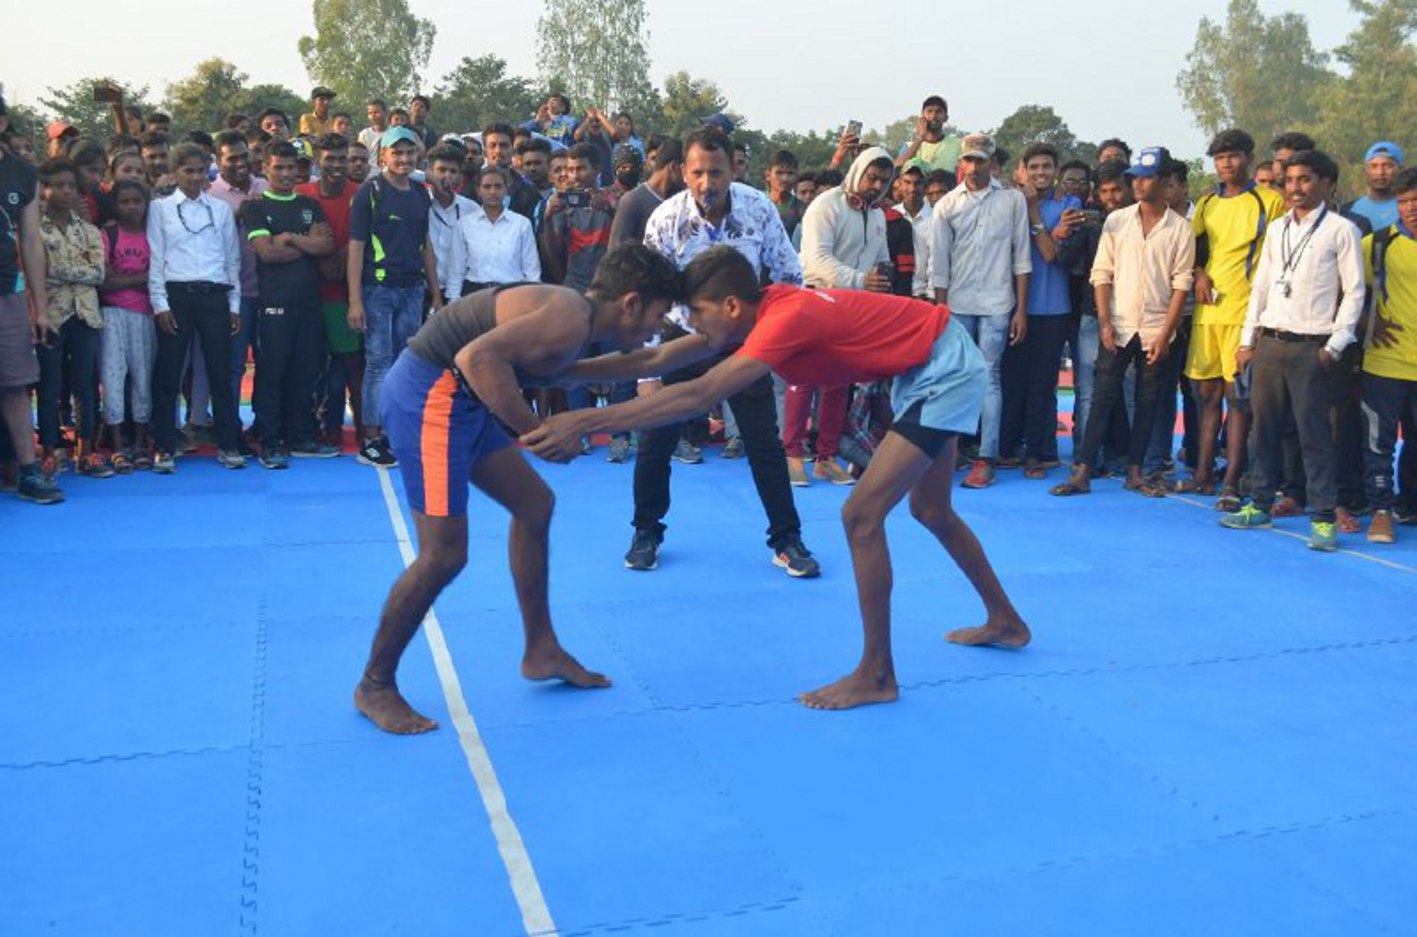 Players of Sohagpur block dominated the Olympic Games competition